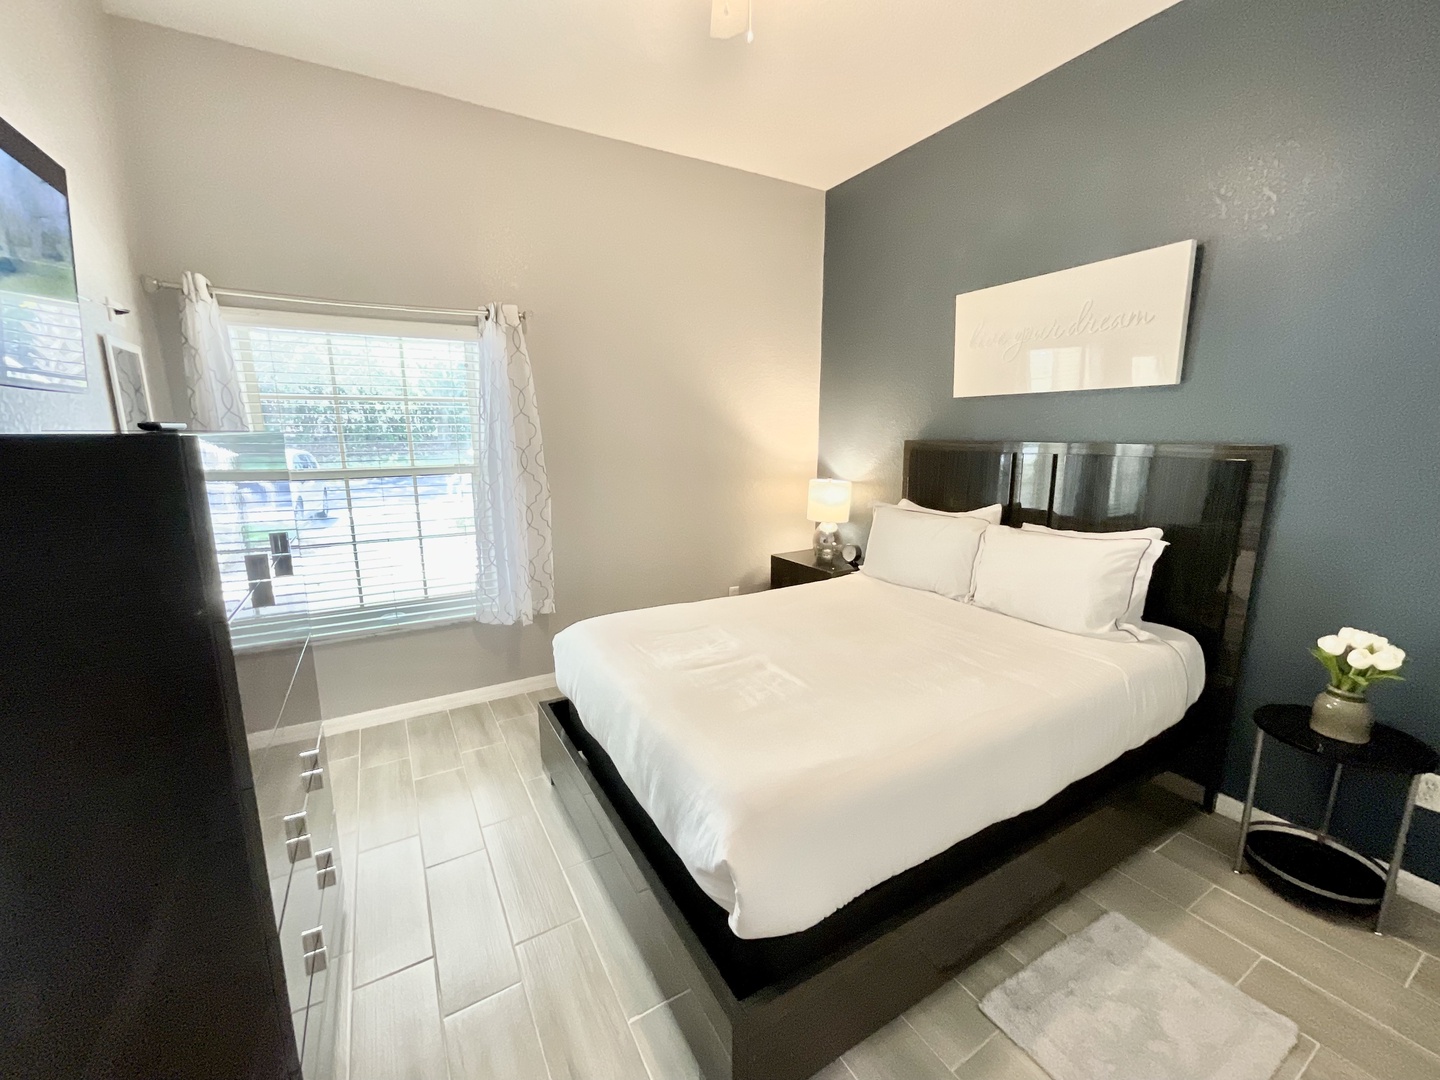 This chic queen bedroom includes a Smart TV & large dresser